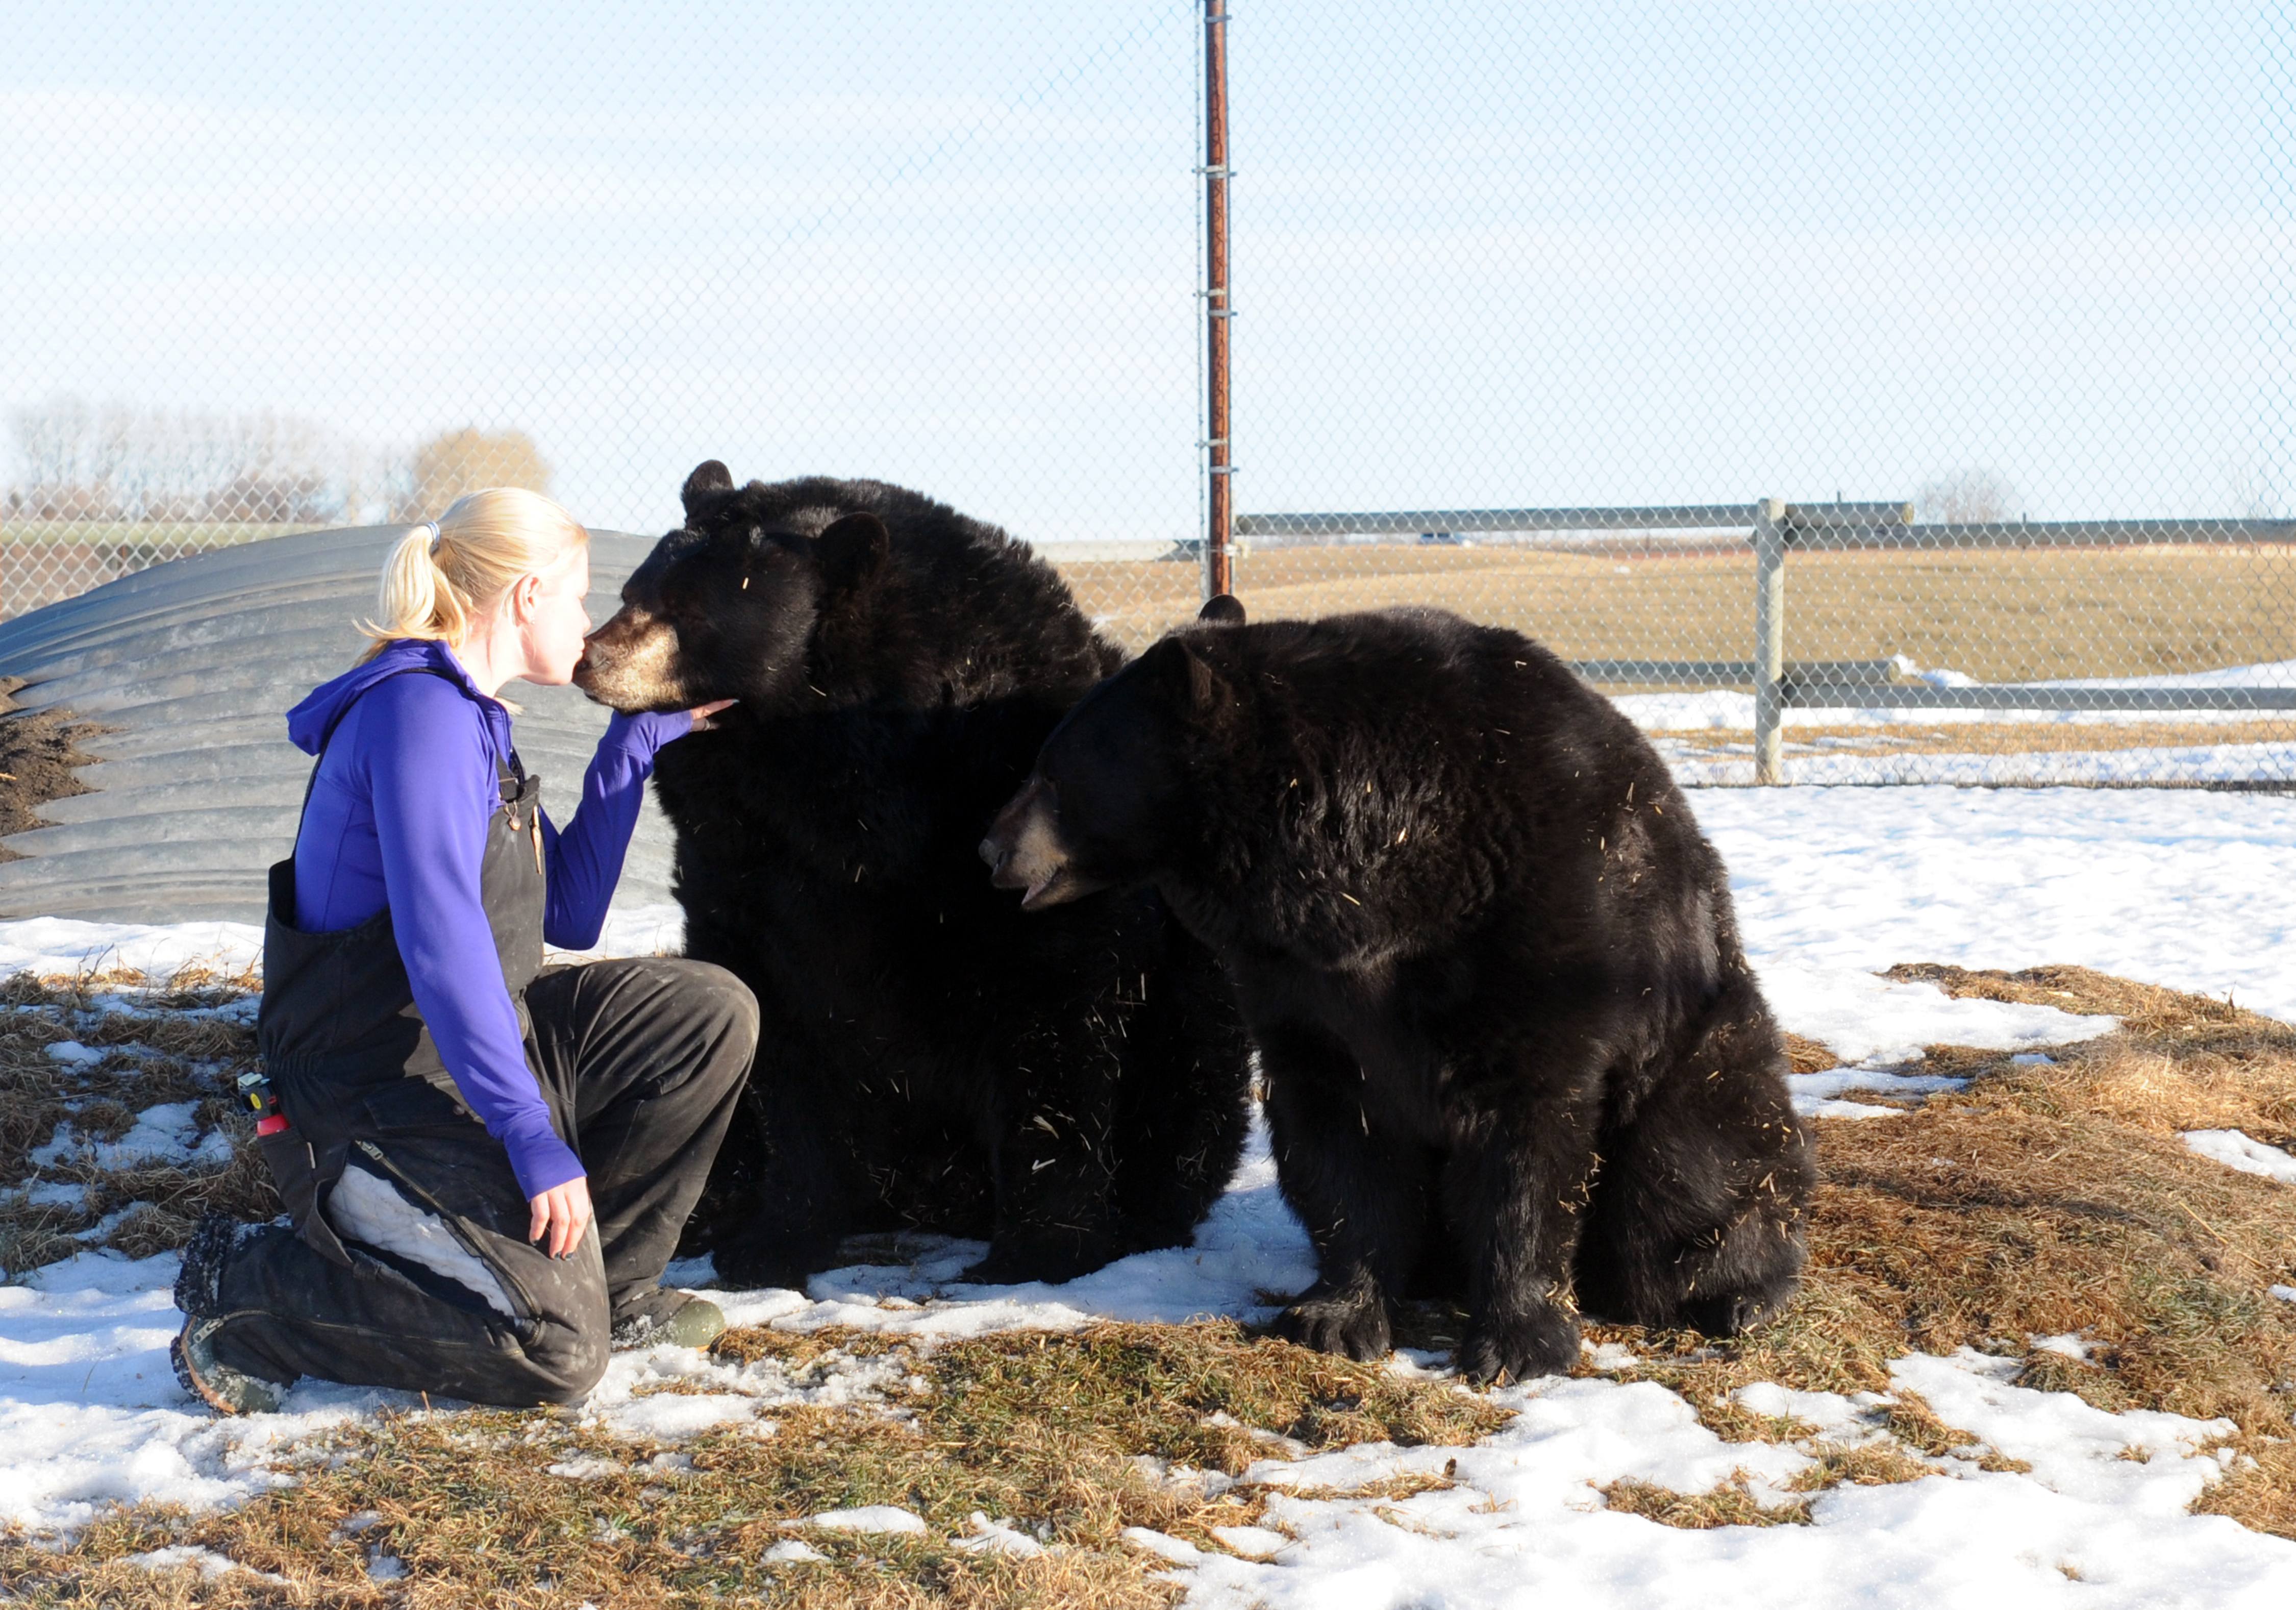 TENDER MOMENT- Serena Bos with Discovery Wildlife Zoo in Innisfail hangs out bears Keno